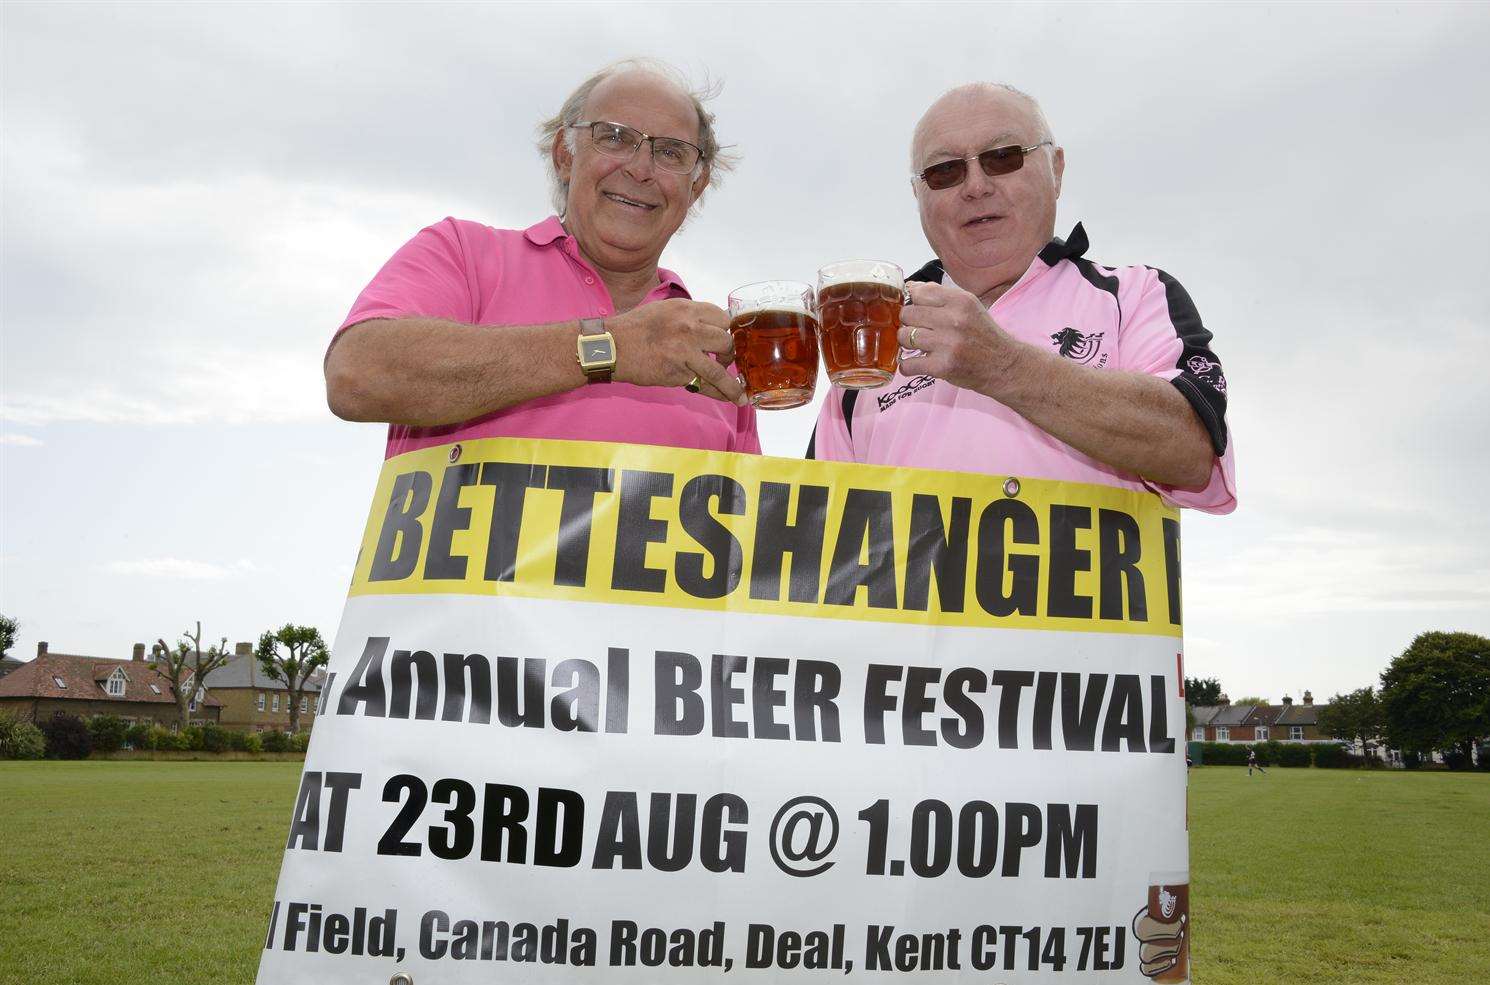 Deal & Betteshanger Rugby Club are stocking up for the 10th annual beer festival on Saturday. Events director Serg Orlov and club president Dave Rose sample just a few.